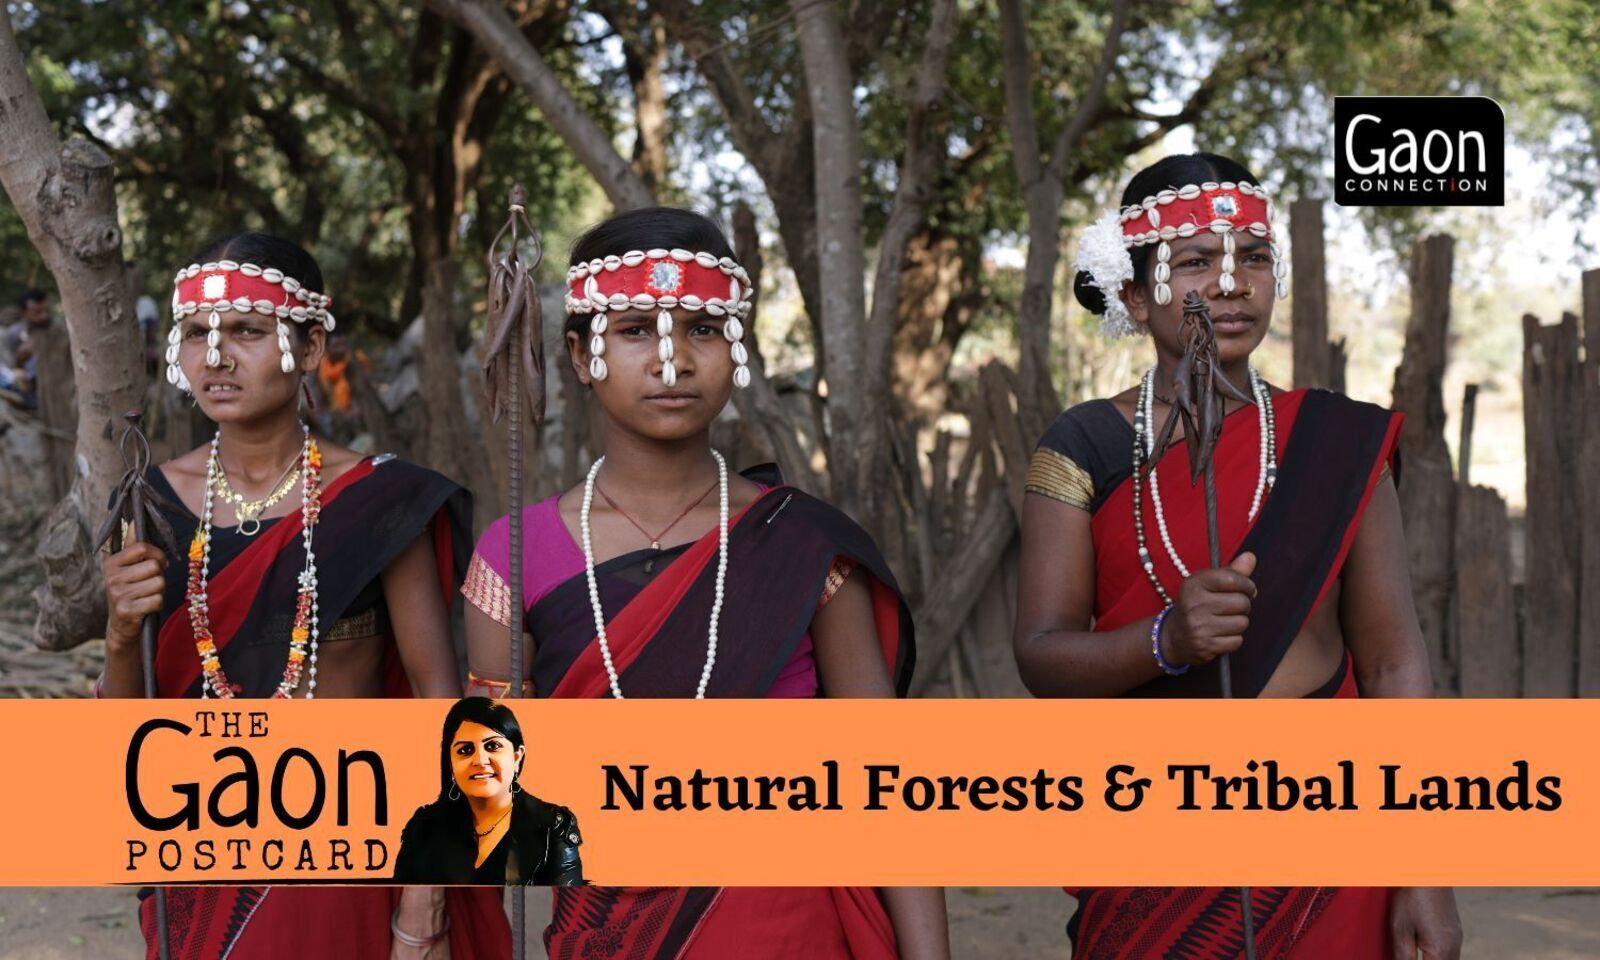 Tribals.io by commention